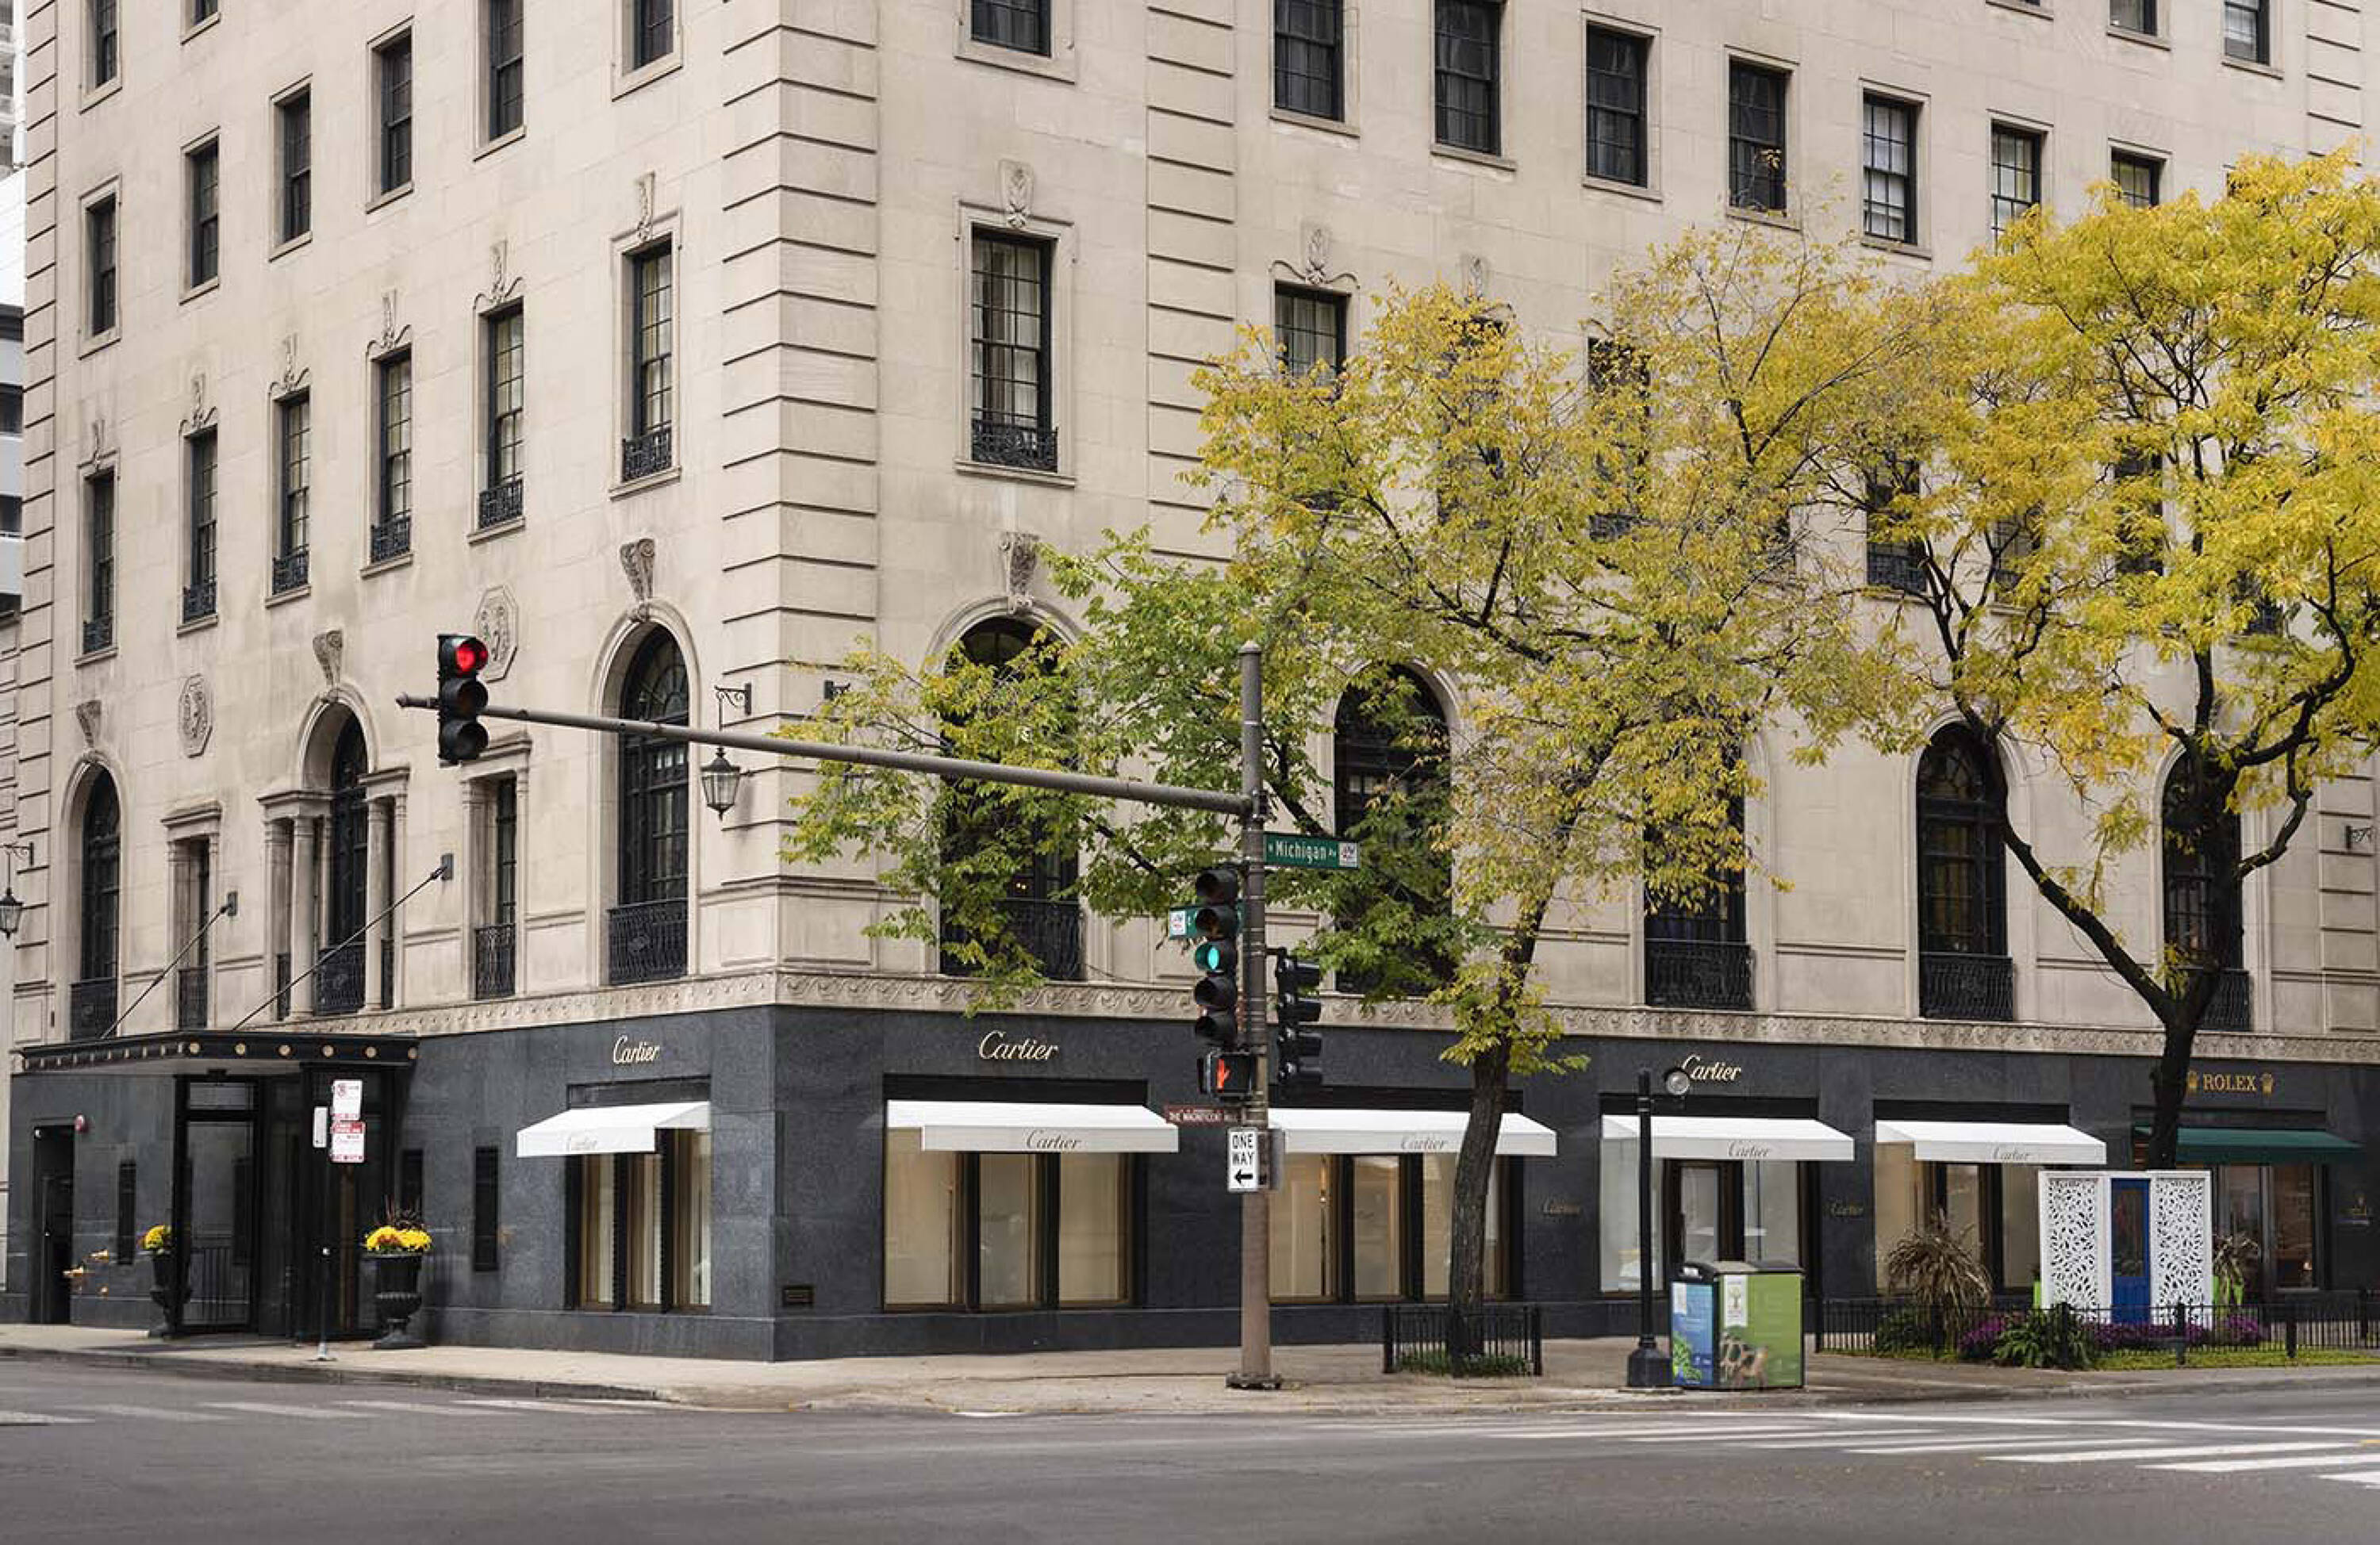 Louis Vuitton, David Yurman, Breitling space for sale on Chicago's Mag Mile